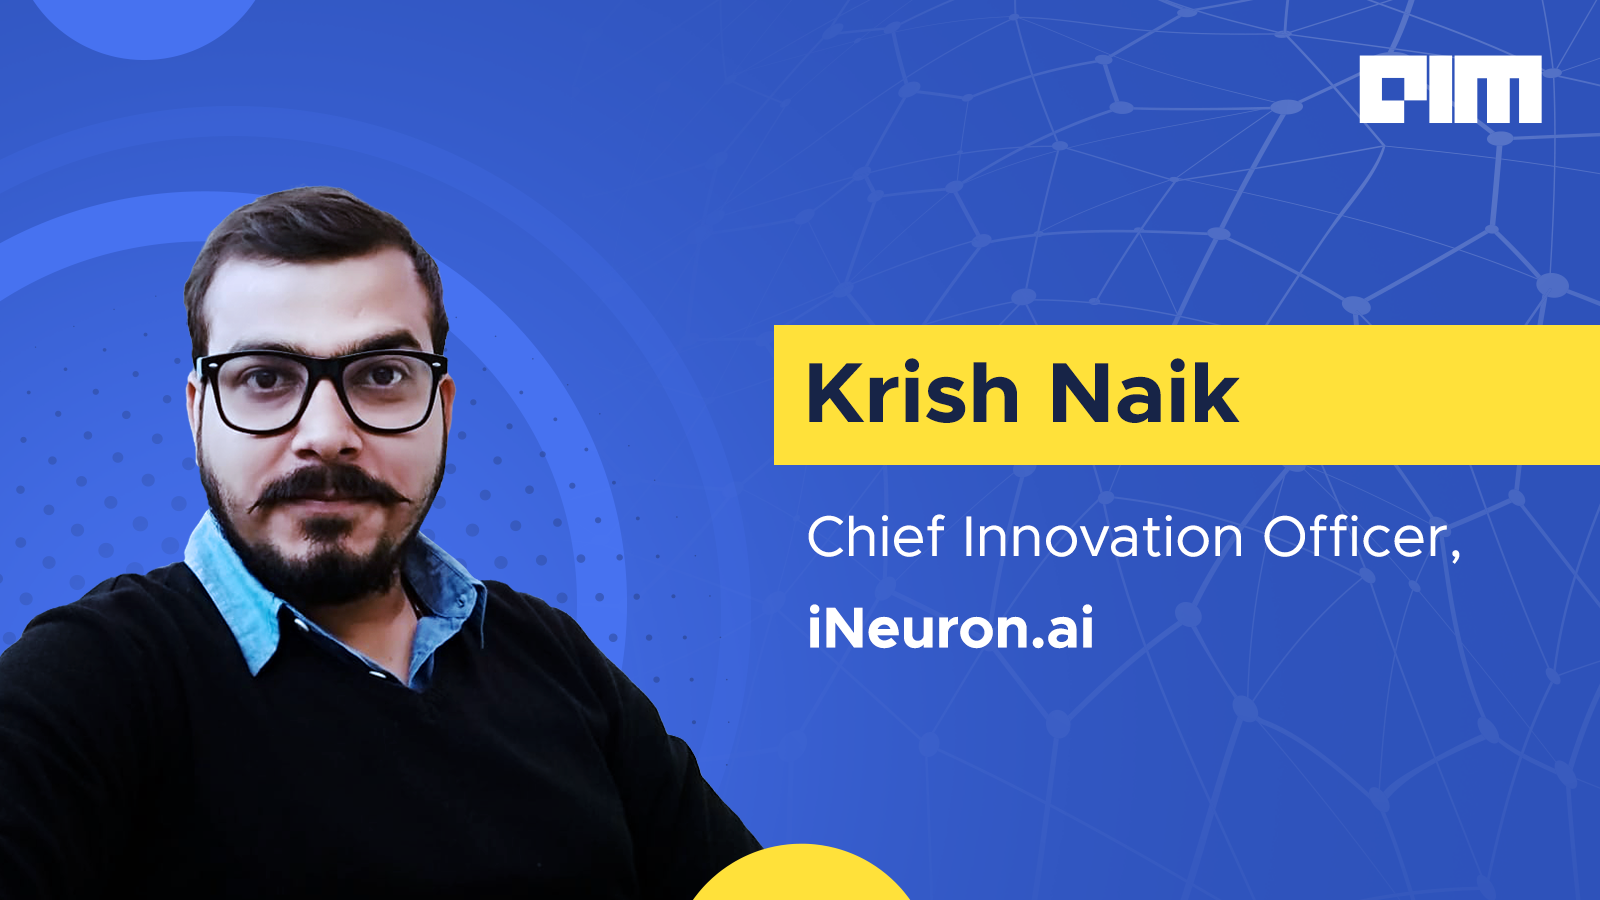 Krish Naik speaks about his ML Journey & advice to data scientists